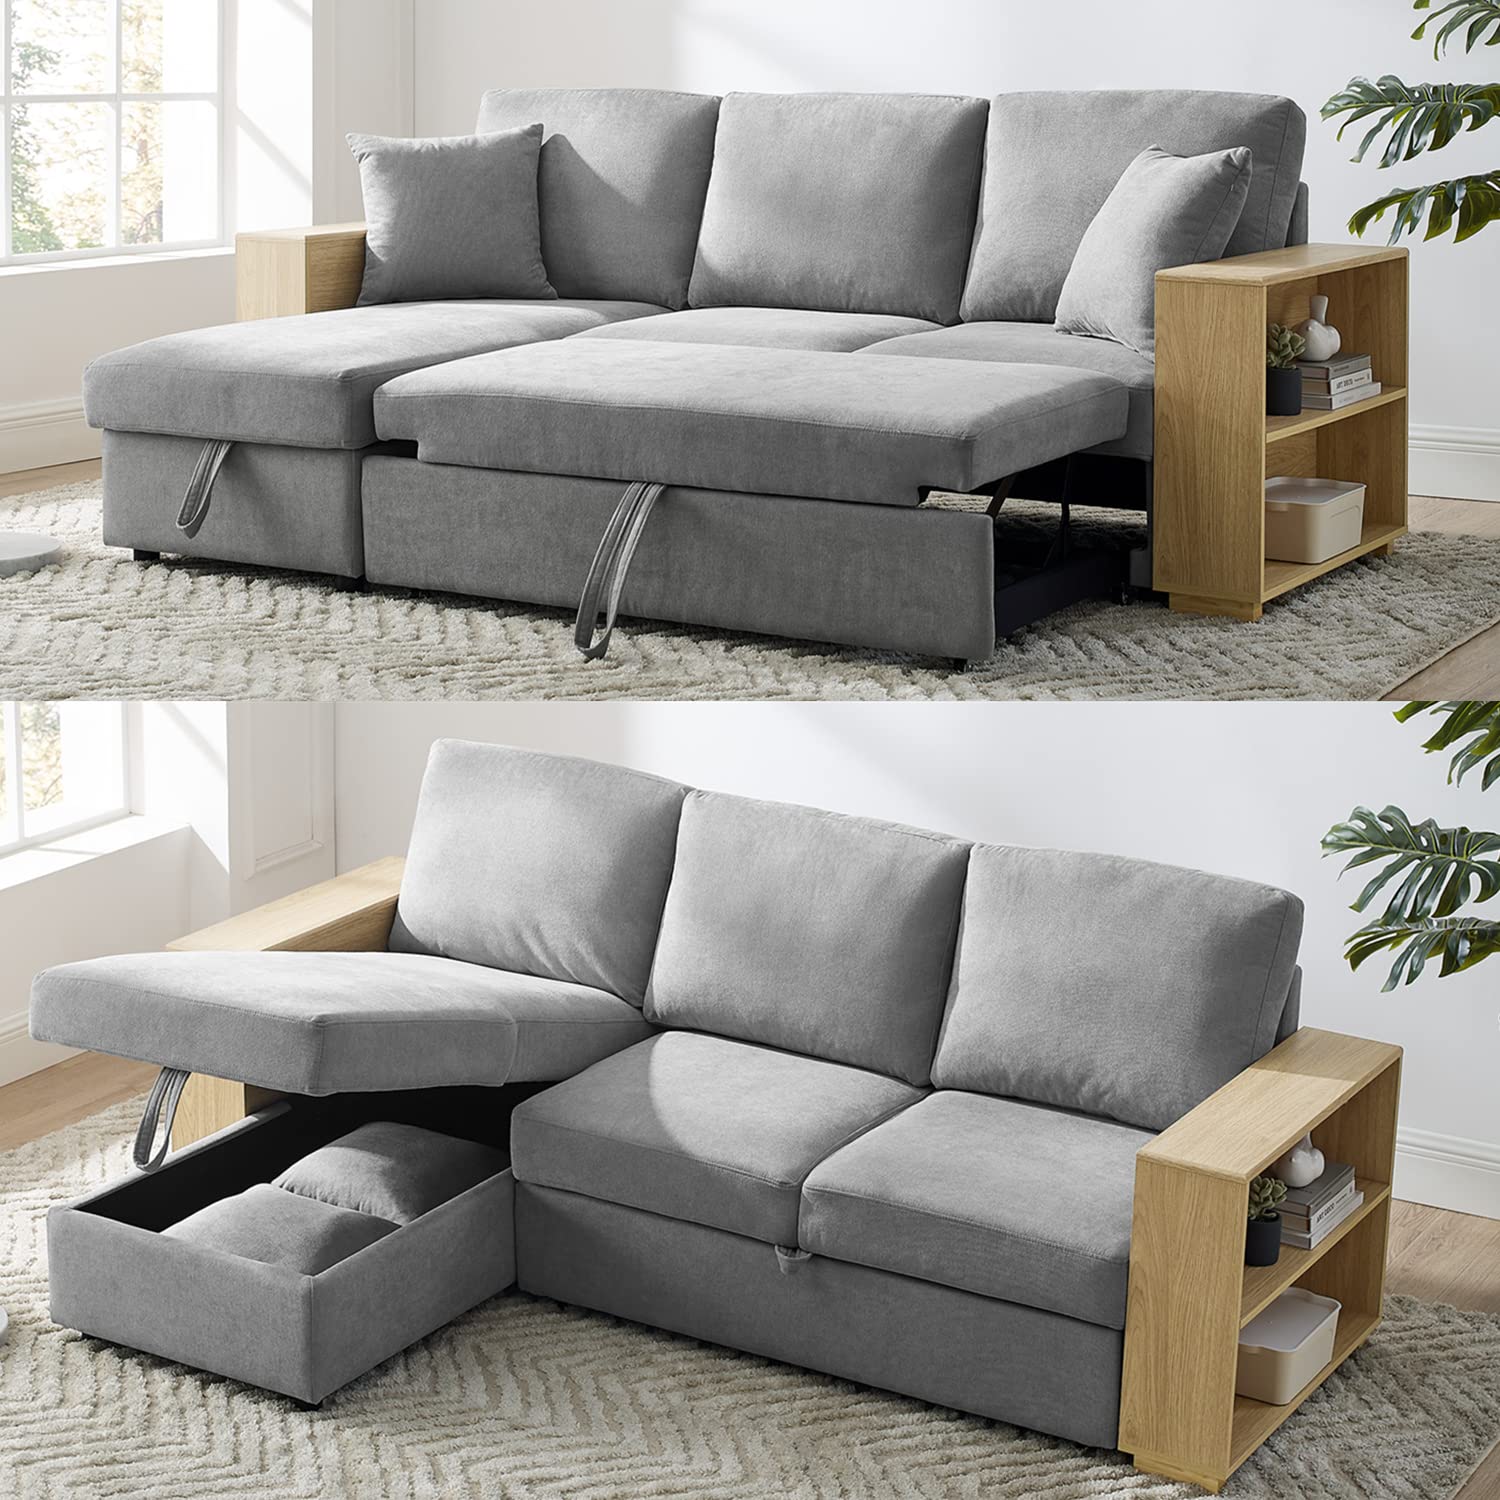 Polibi 88 Convertible Pull-Out Sleeper Sofa Bed Wreversible Storage Chaise Lounge L-Shaped Sectional Sofa Couch Armrests With Ad